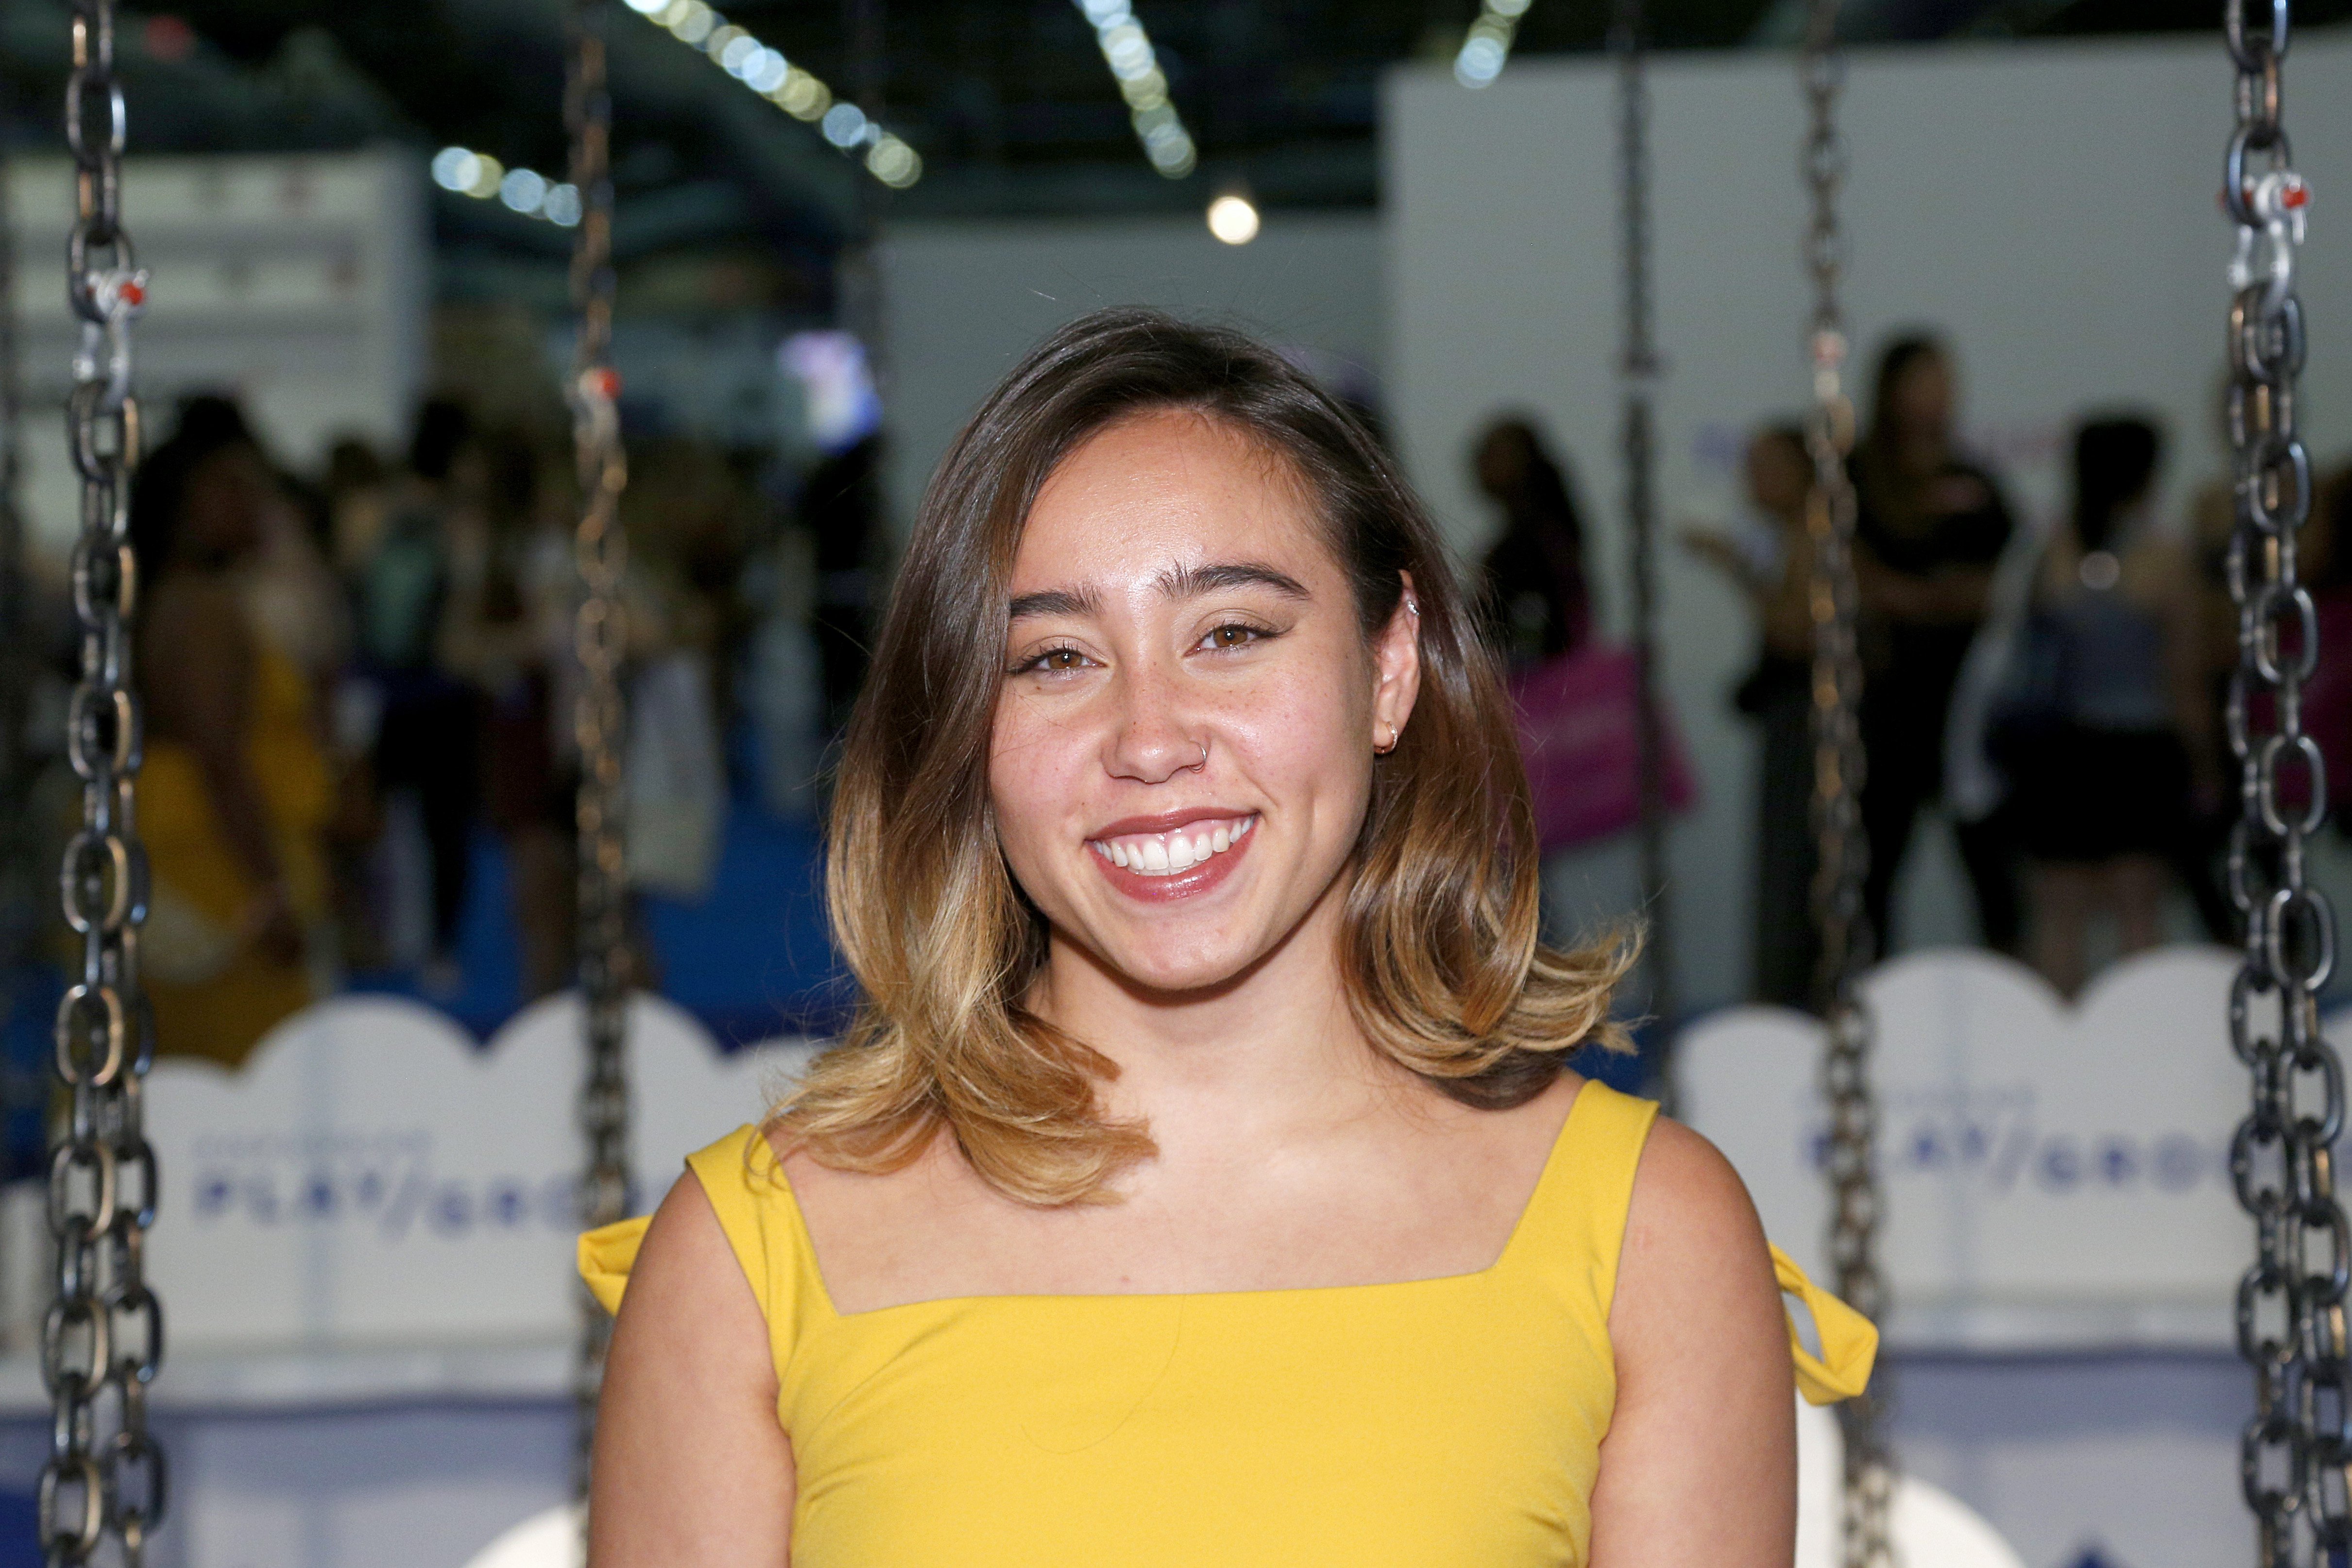 Katelyn Ohashi at POPSUGAR Play/Ground in June 2019. | Photo: Getty Images